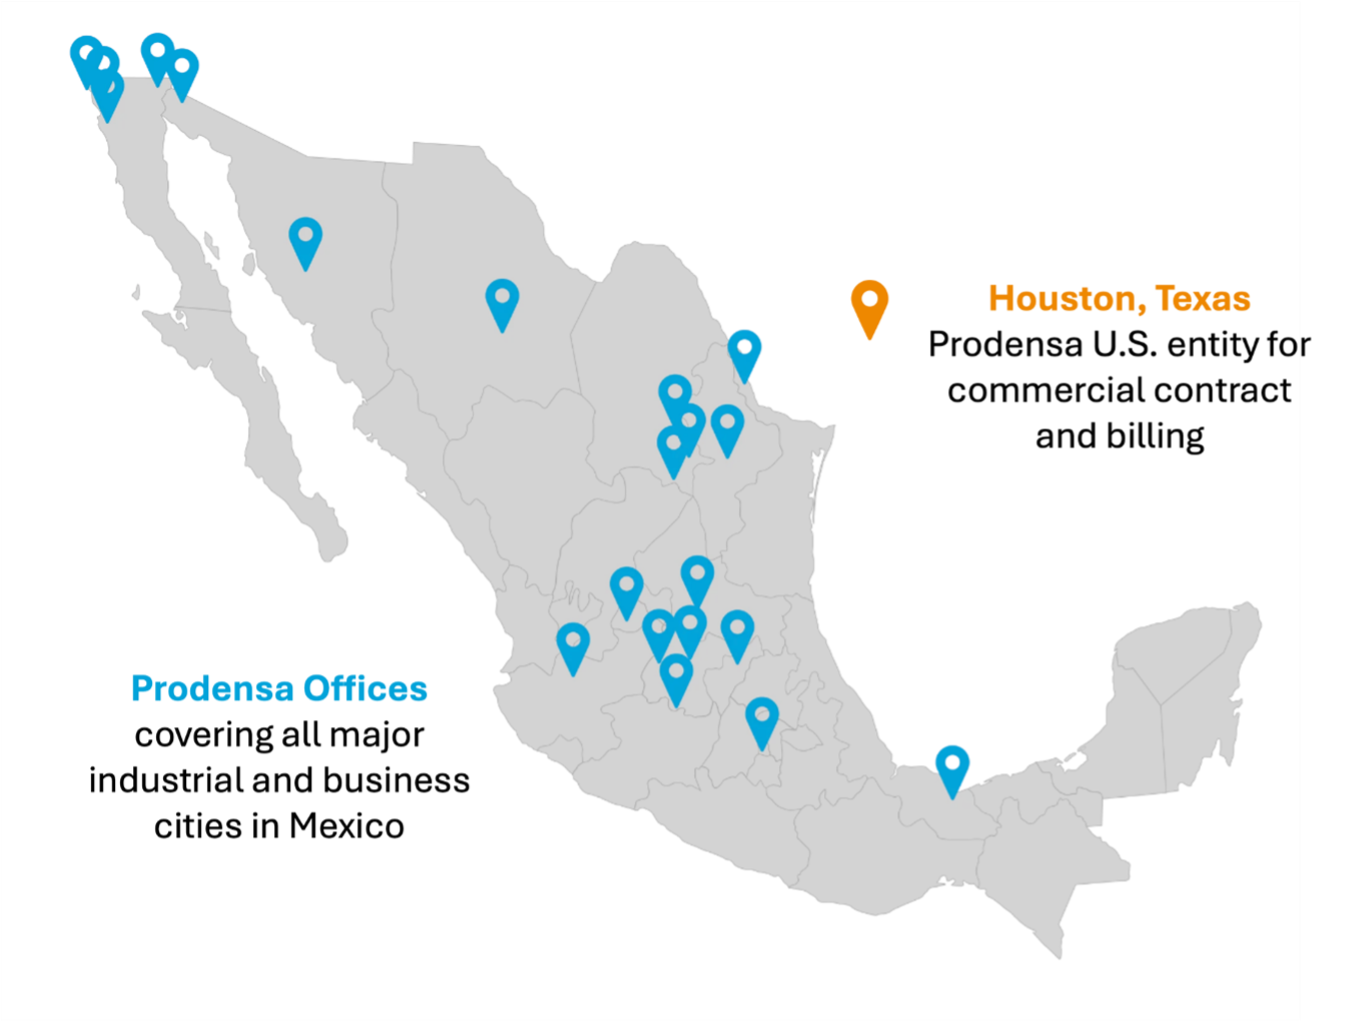 Prodensa offices throughout Mexico